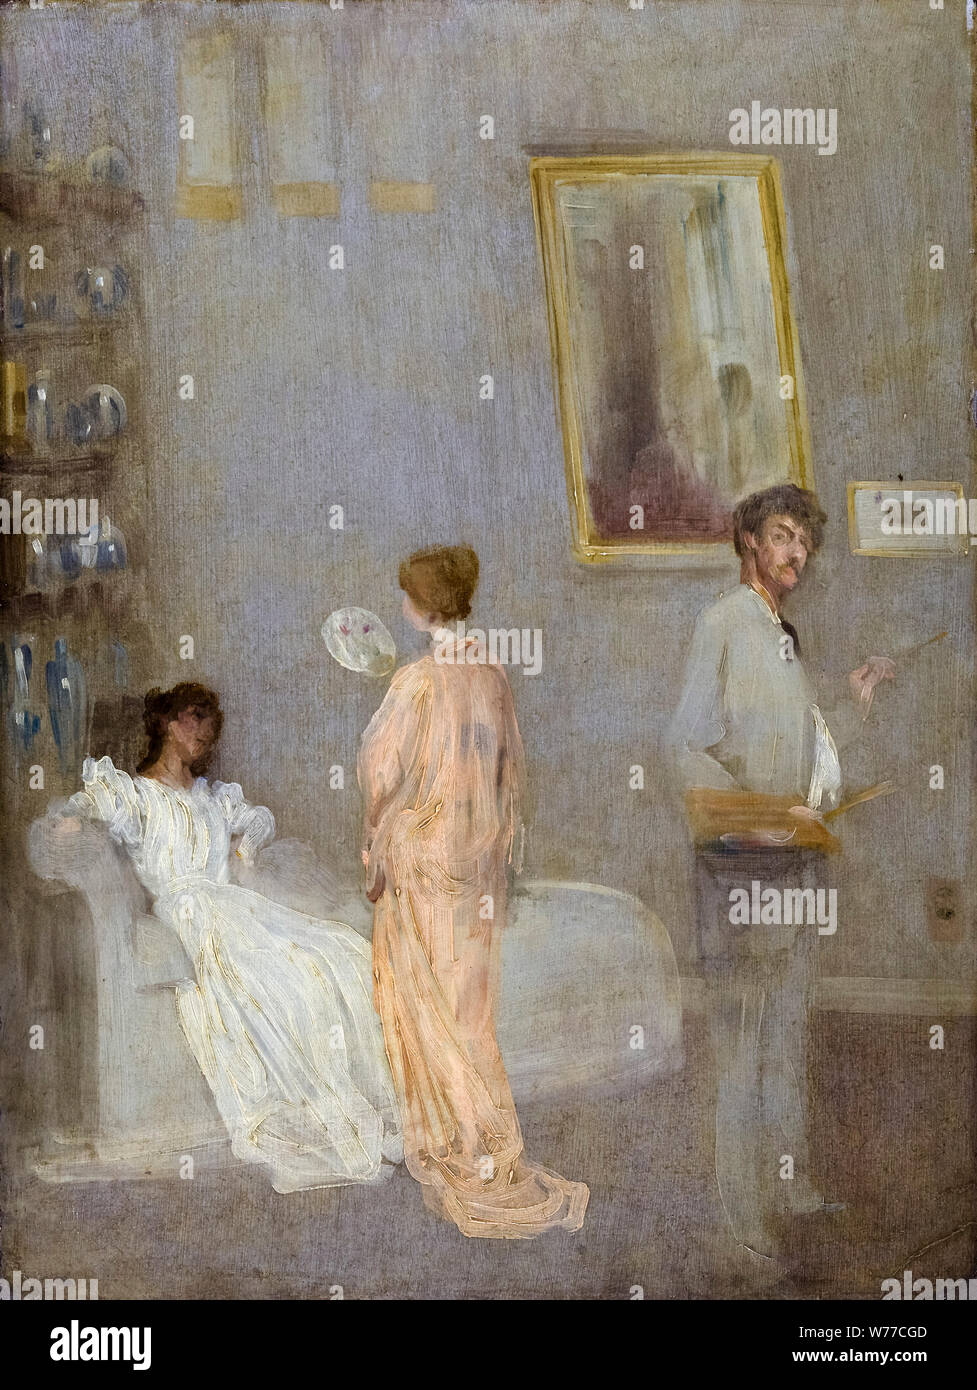 James McNeill Whistler, The Artist in His Studio, painting, 1865-1866 Stock Photo